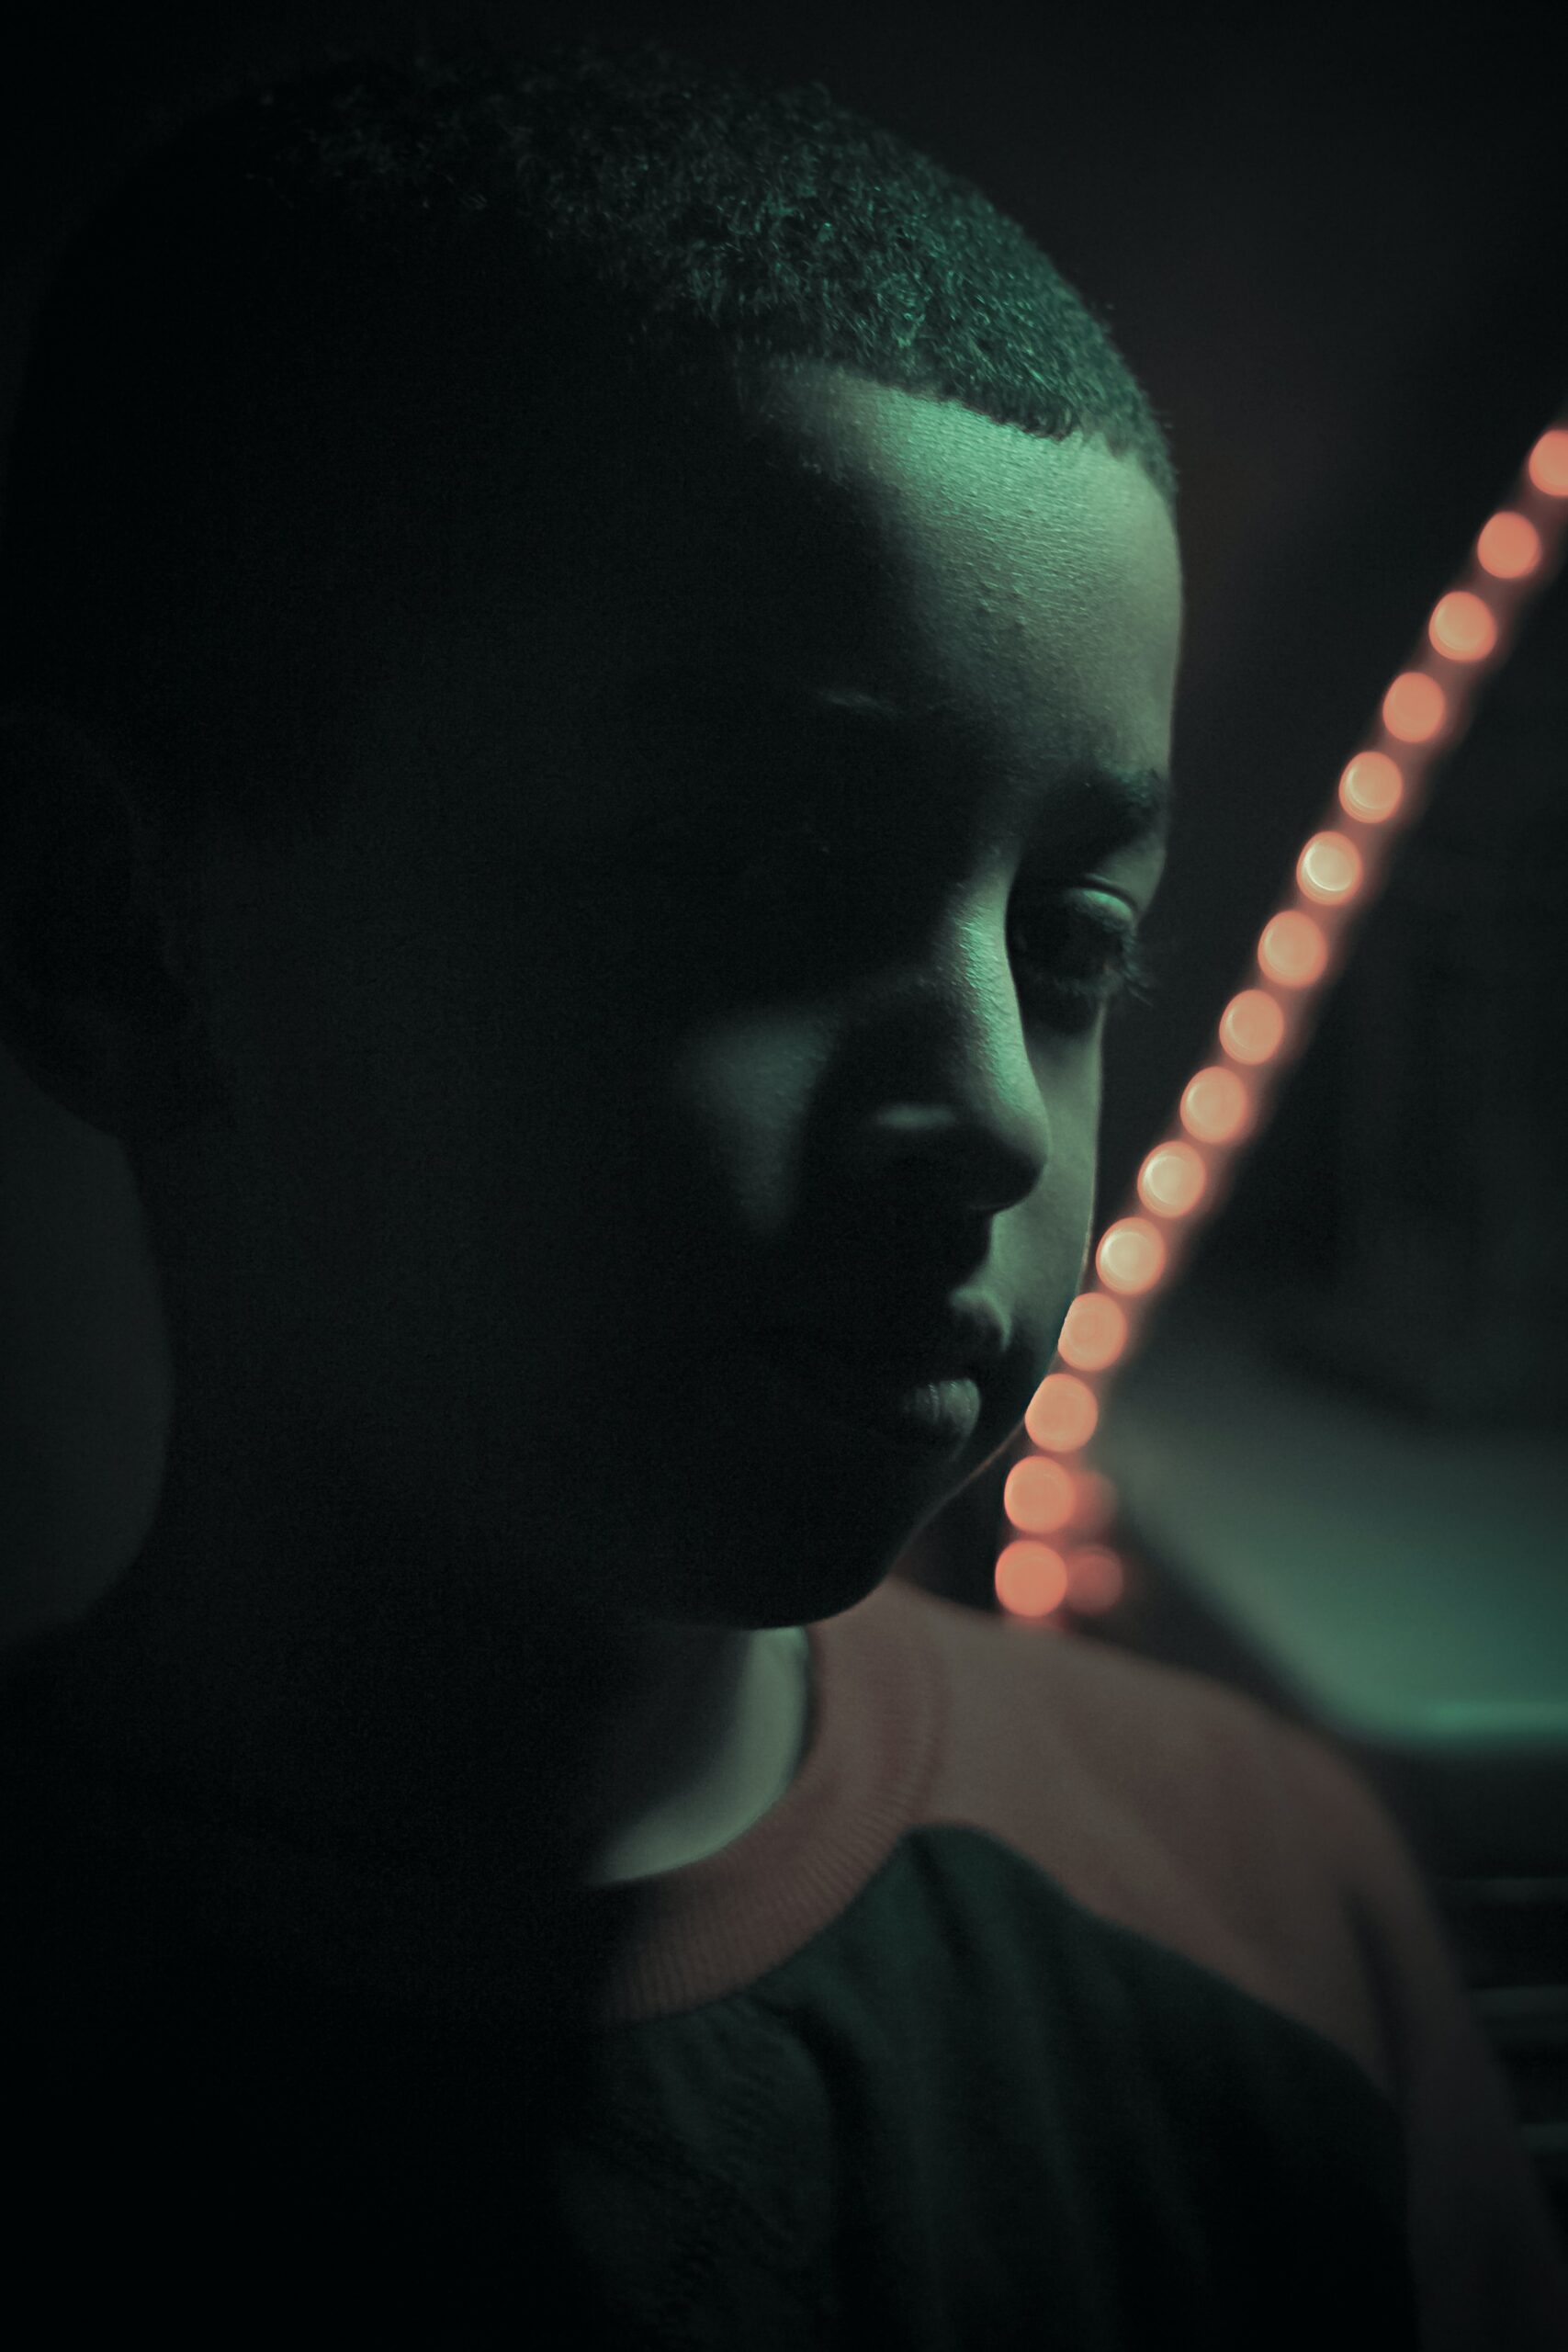 Stock photography closeup of sad boy in dim light; a string of out-of-focus lights appears behind him.